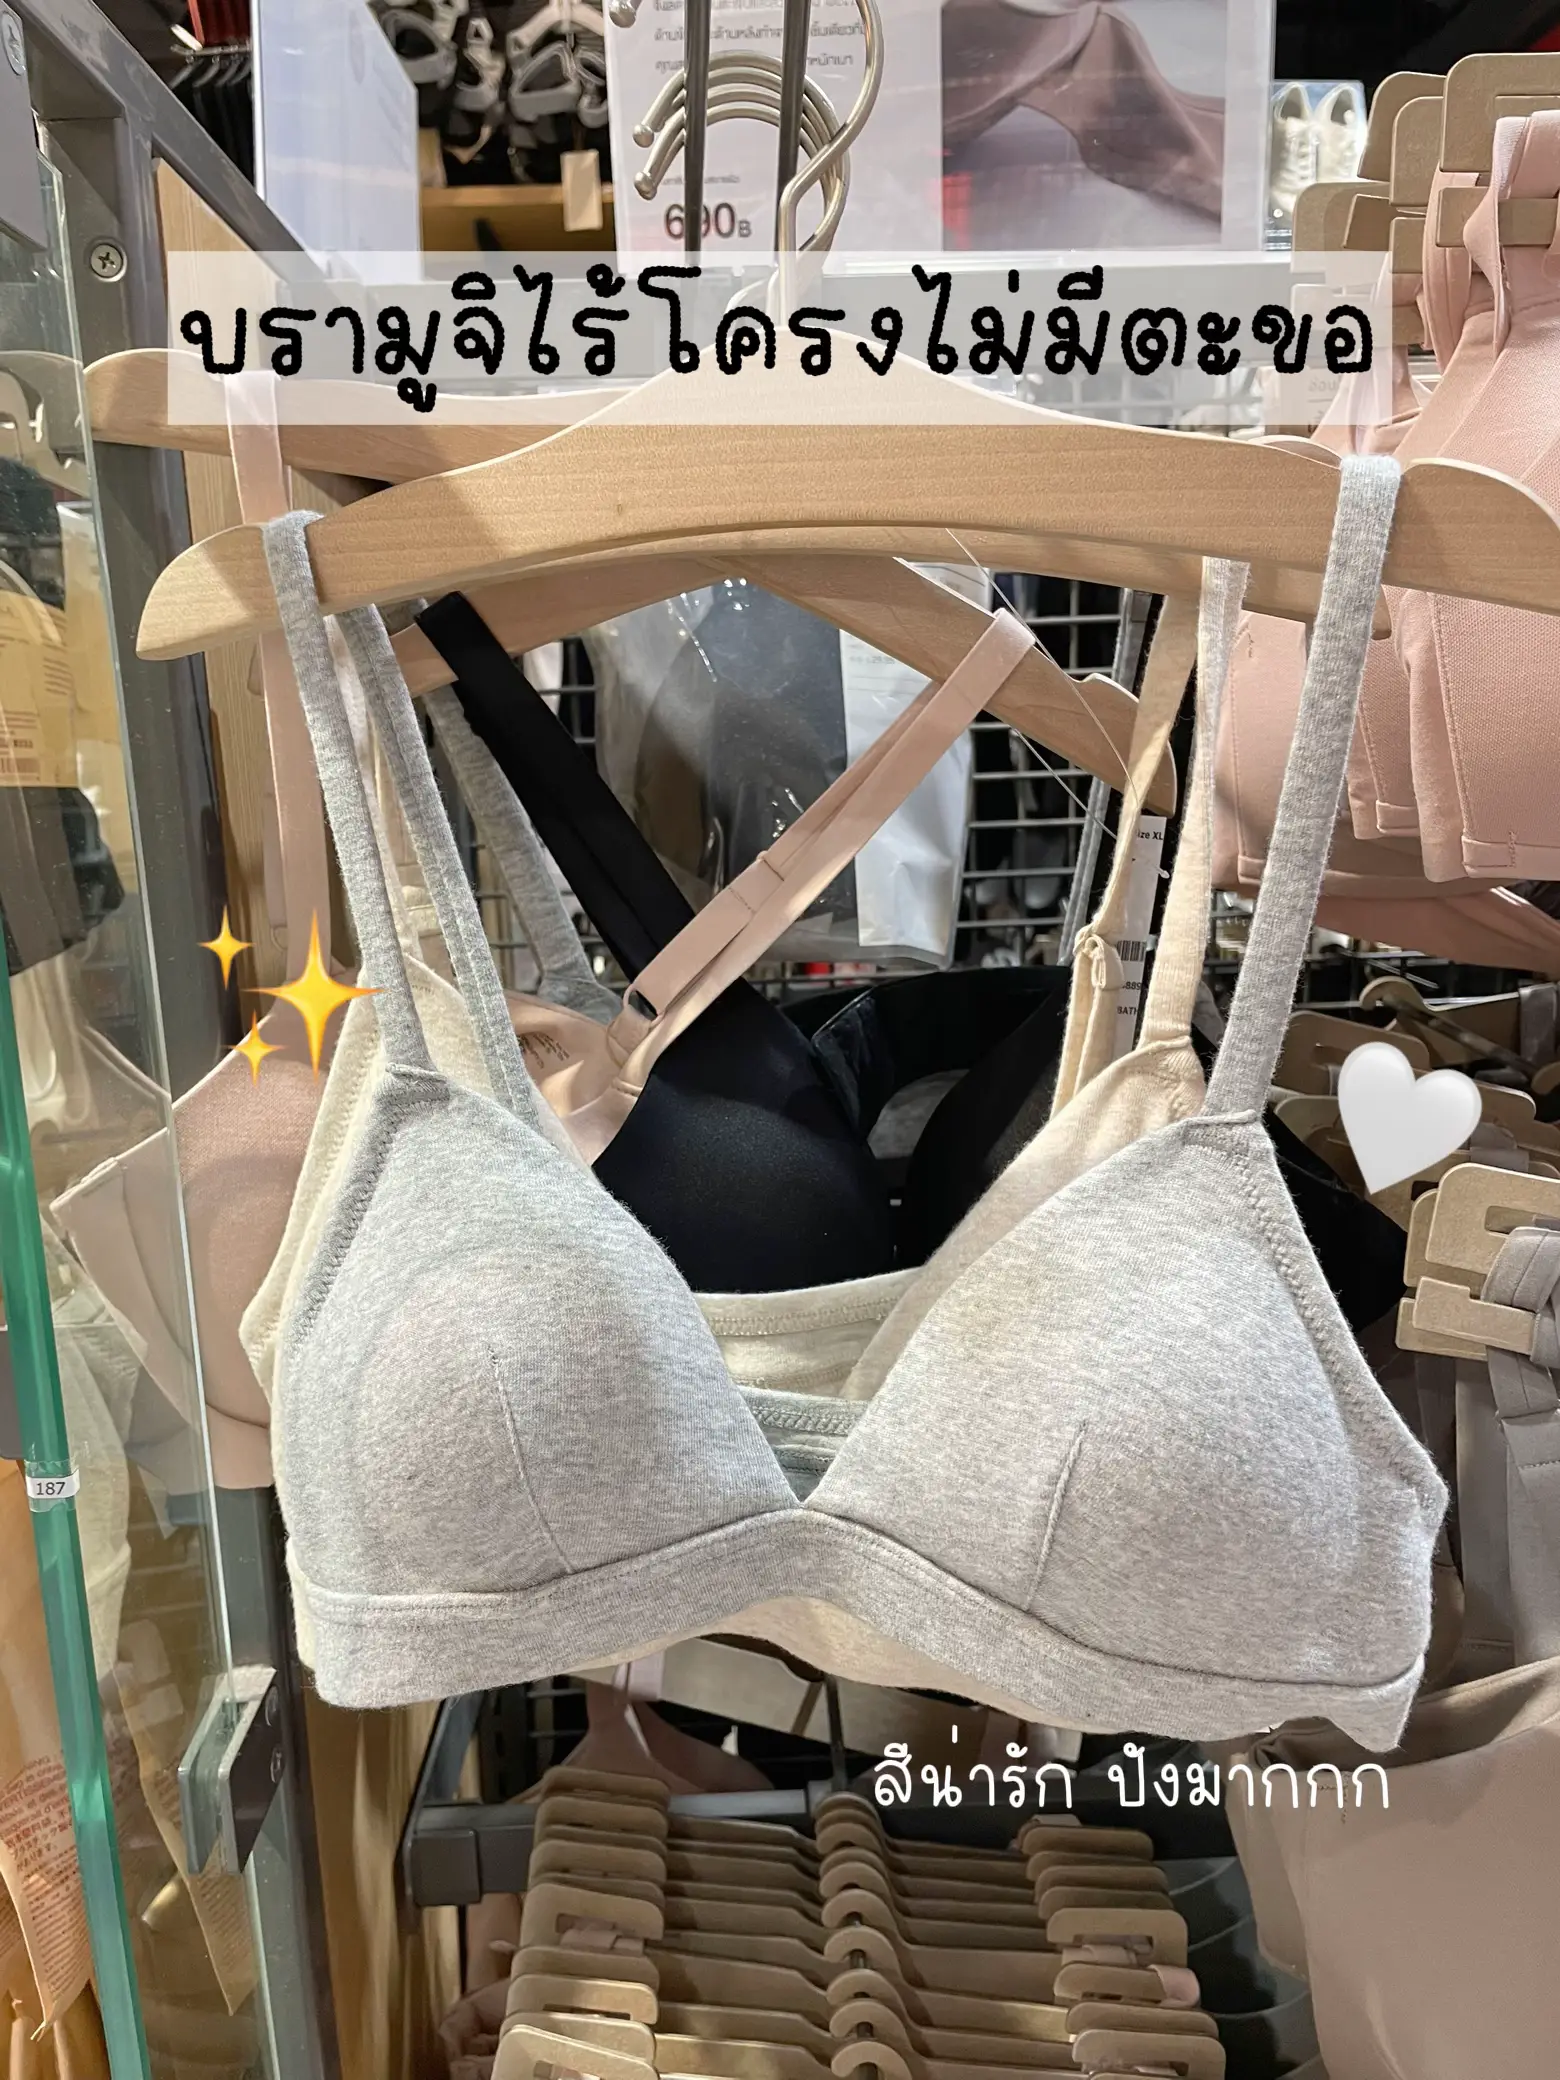 Trameless Bra without Hook, Removable Cup, Comfortable, Cute Color✨🤍, Gallery posted by อาหมวย🥕